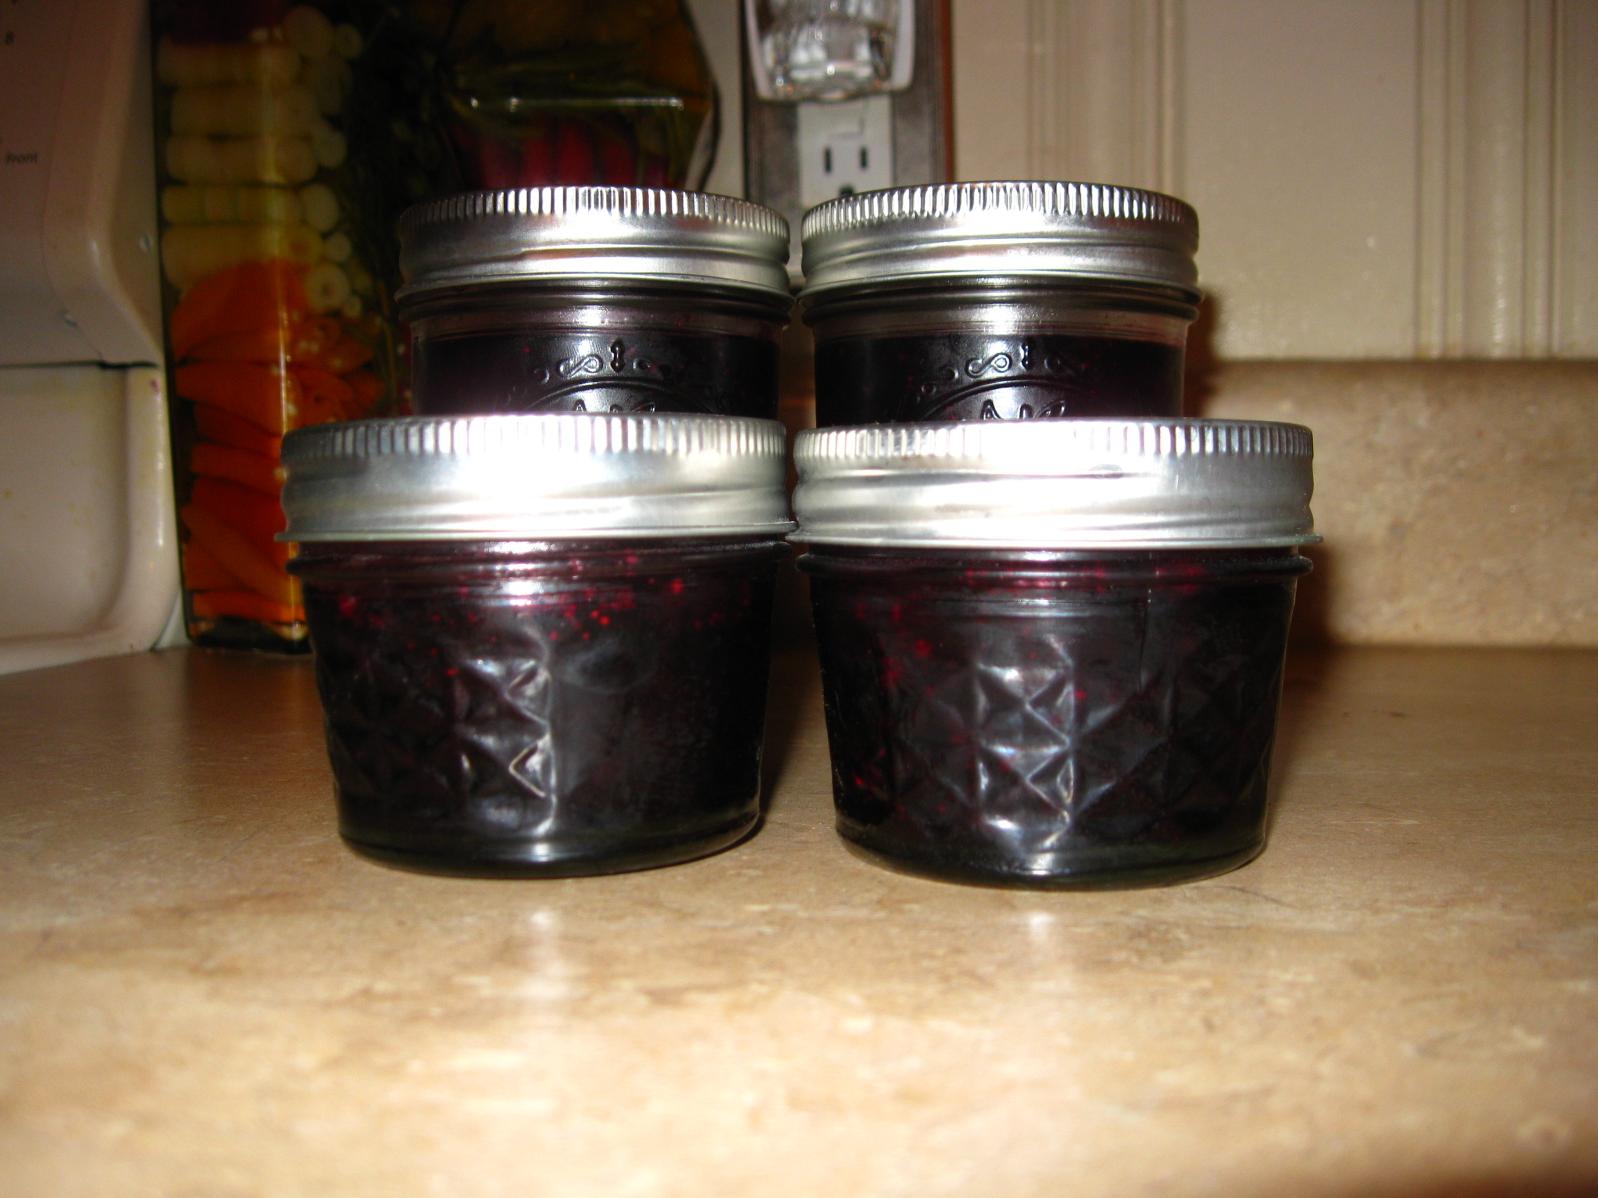  Savor the taste of summer with this luscious blueberry Chardonnay jam.